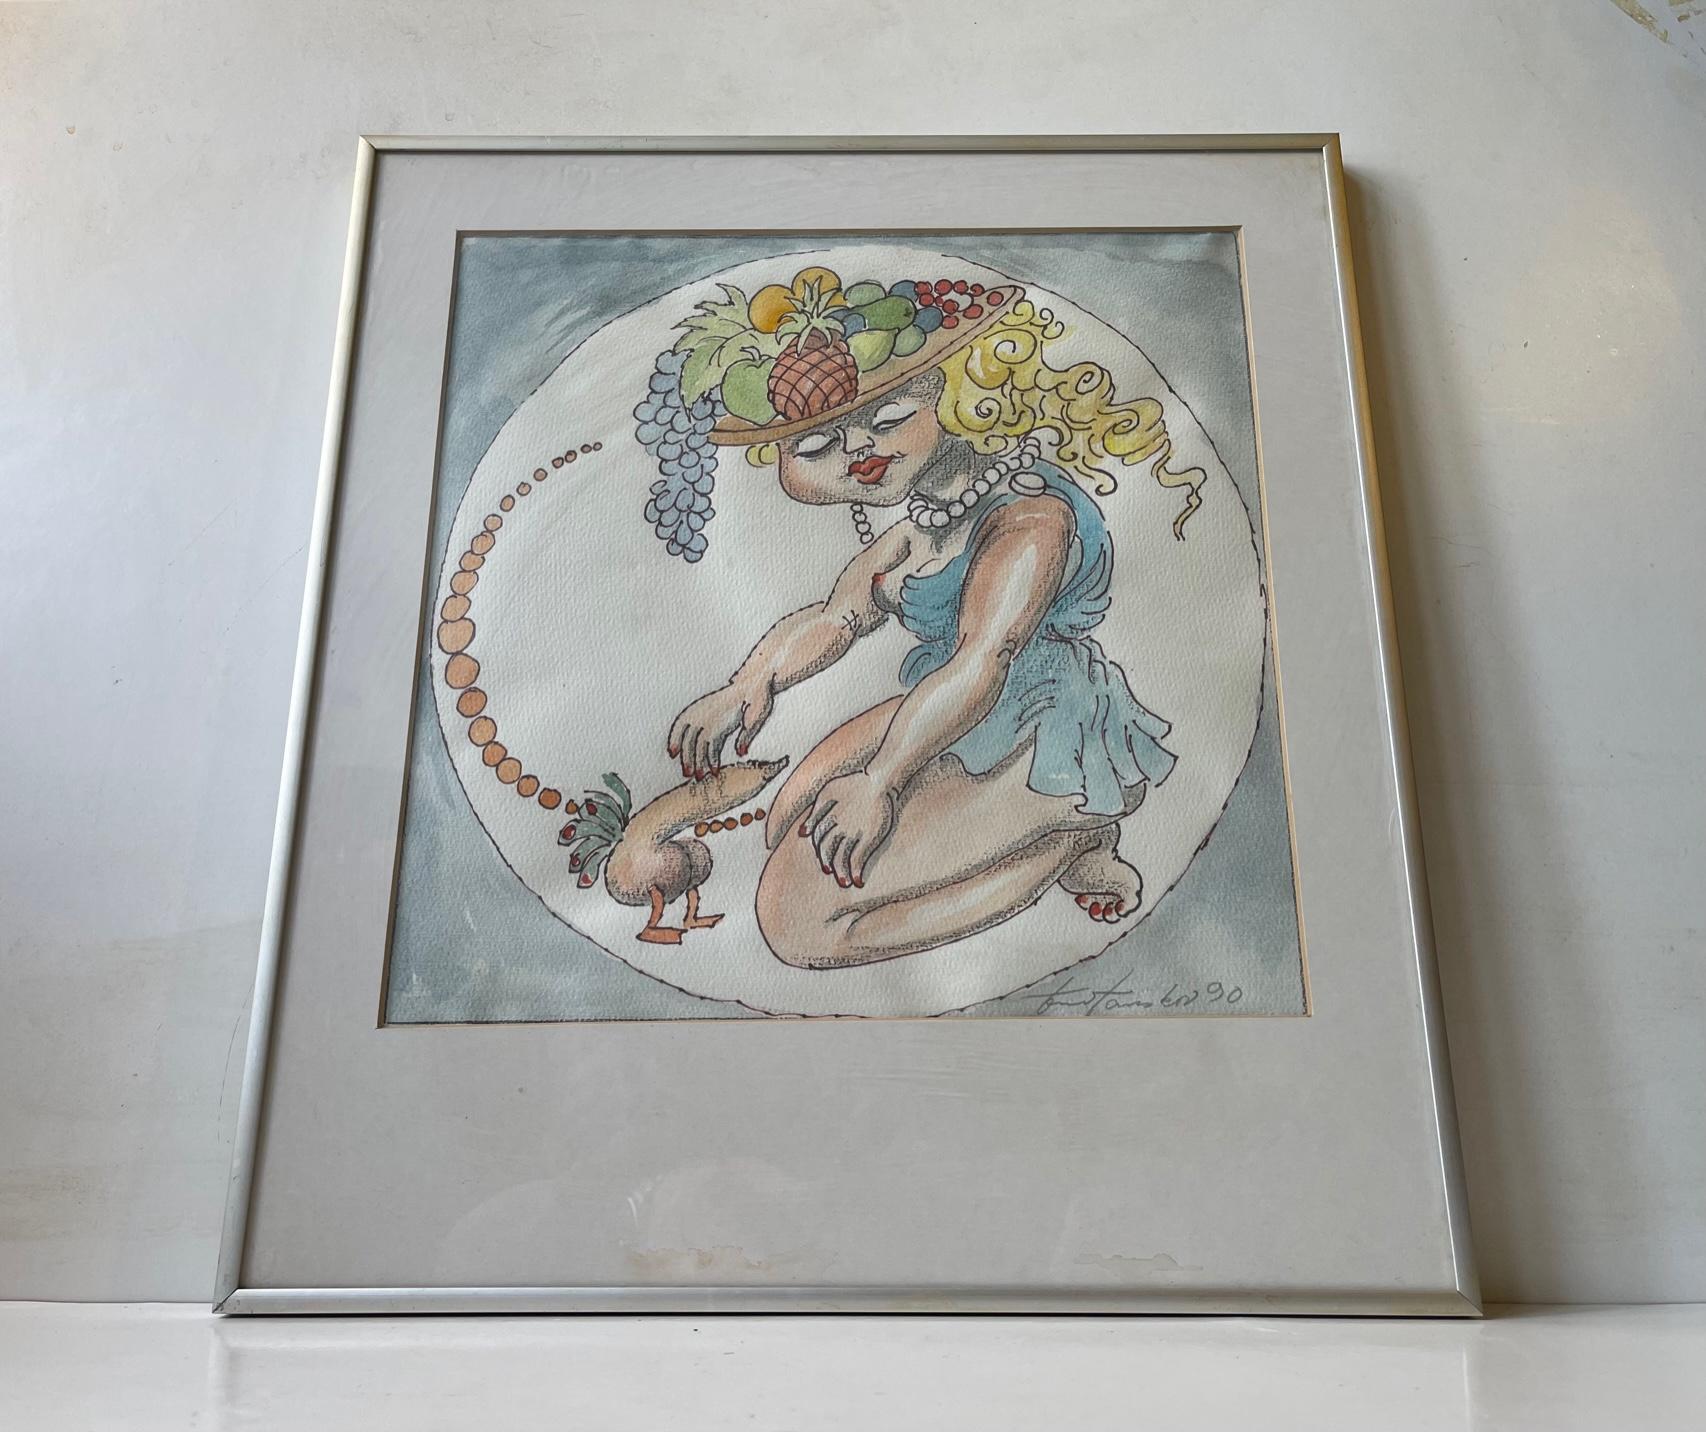 This piece, despite the lack of refined artistic details makes up for it in the sarcastic and unusual department. That sure is a funny chicken being stroked by a fruit-basket-hat wearing young lady. Its executed in watercolor and acrylic on canvas